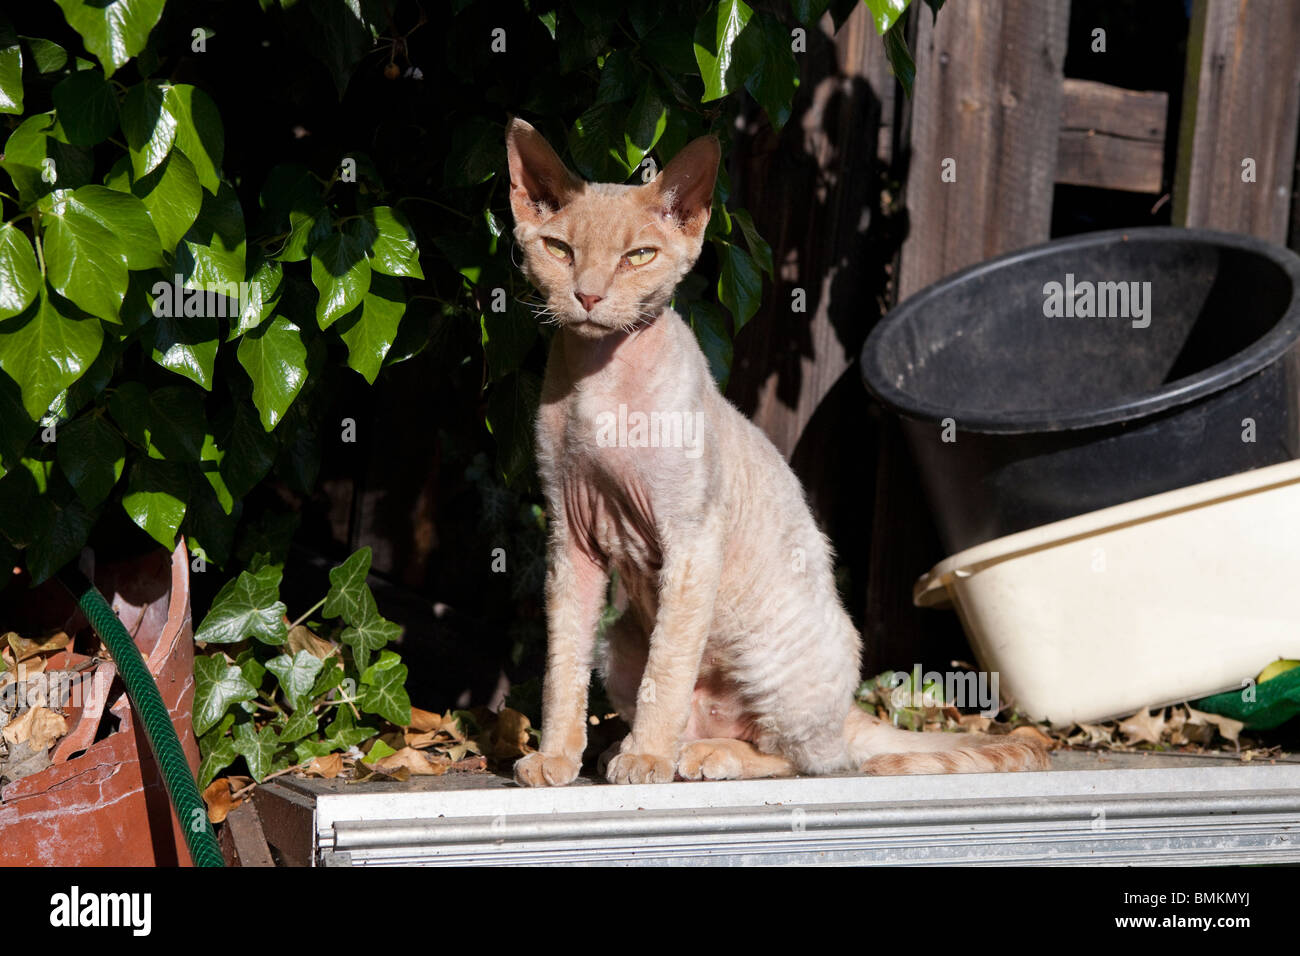 A young Devon Rex - The Devon Rex is a breed of intelligent, short-haired cat that emerged in England during the 1960s. Stock Photo